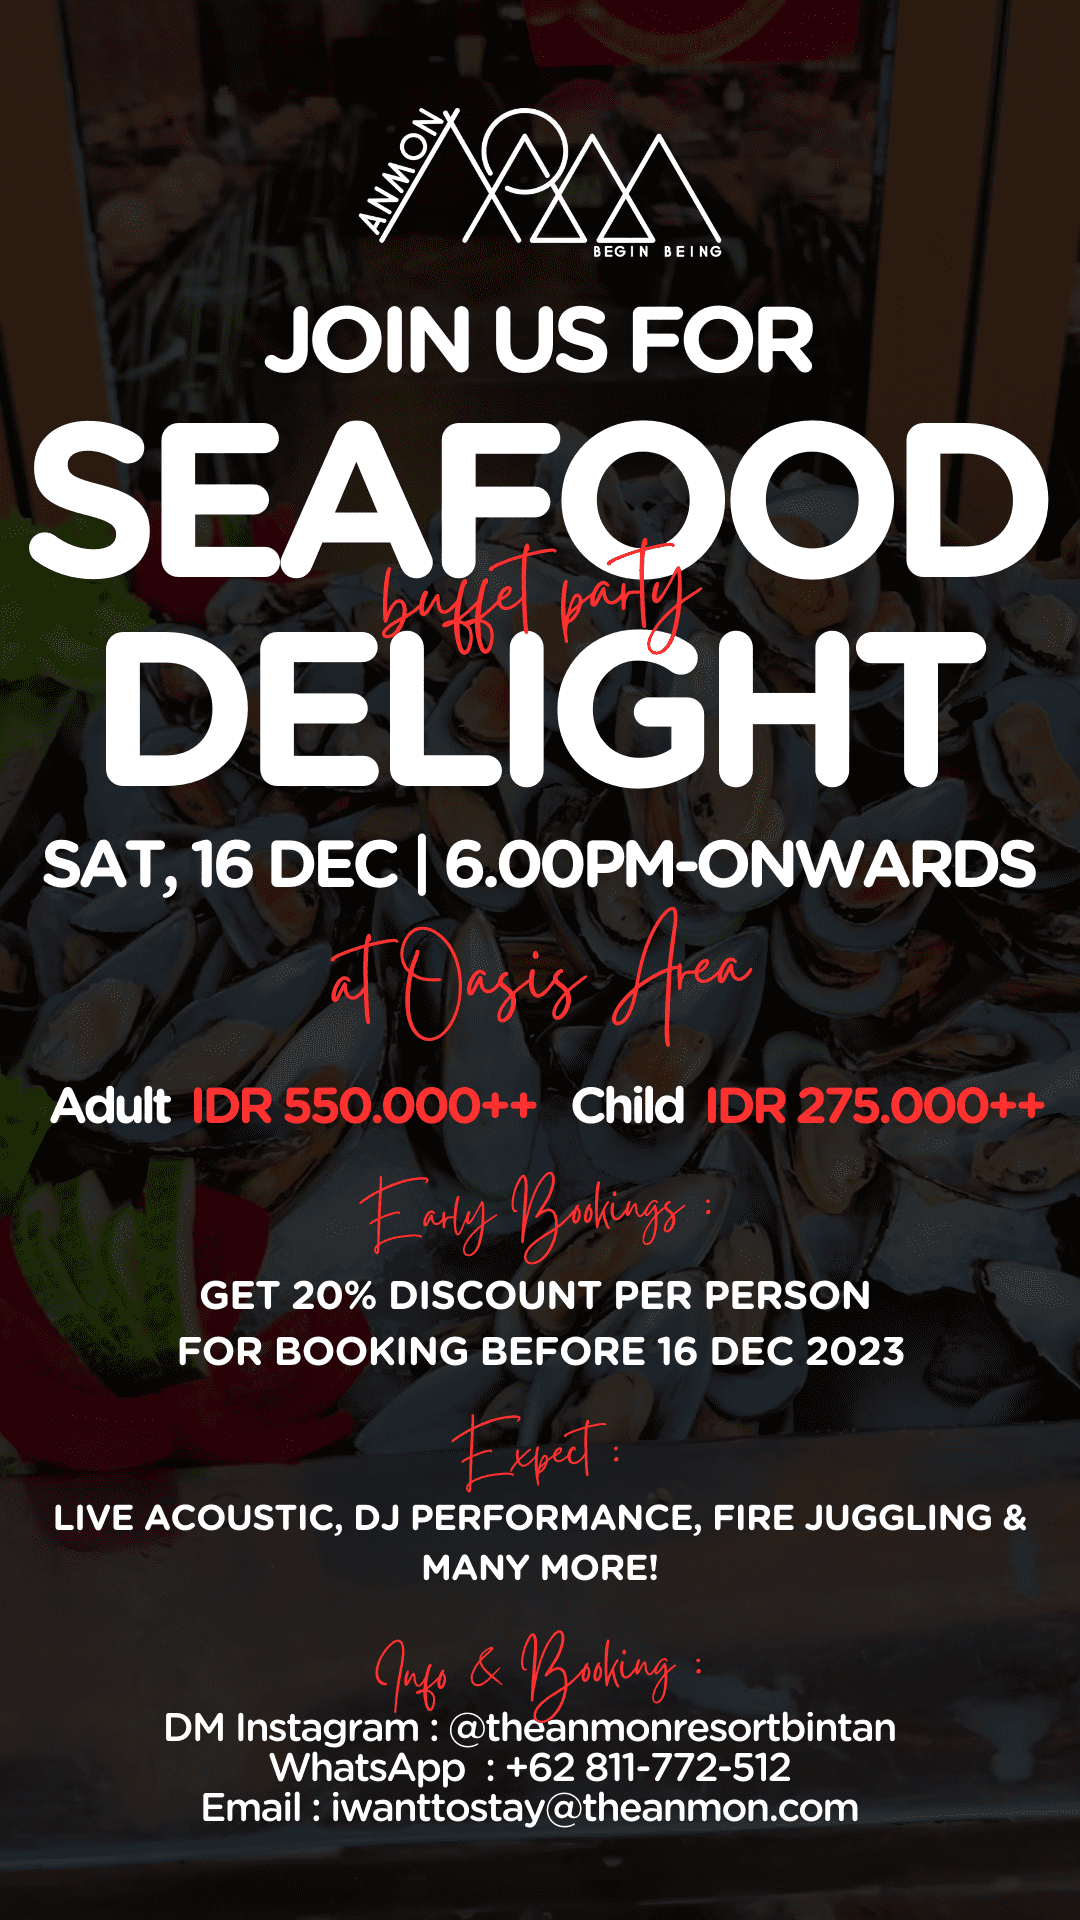 16 Dec - Seafood Delight Buffet Party